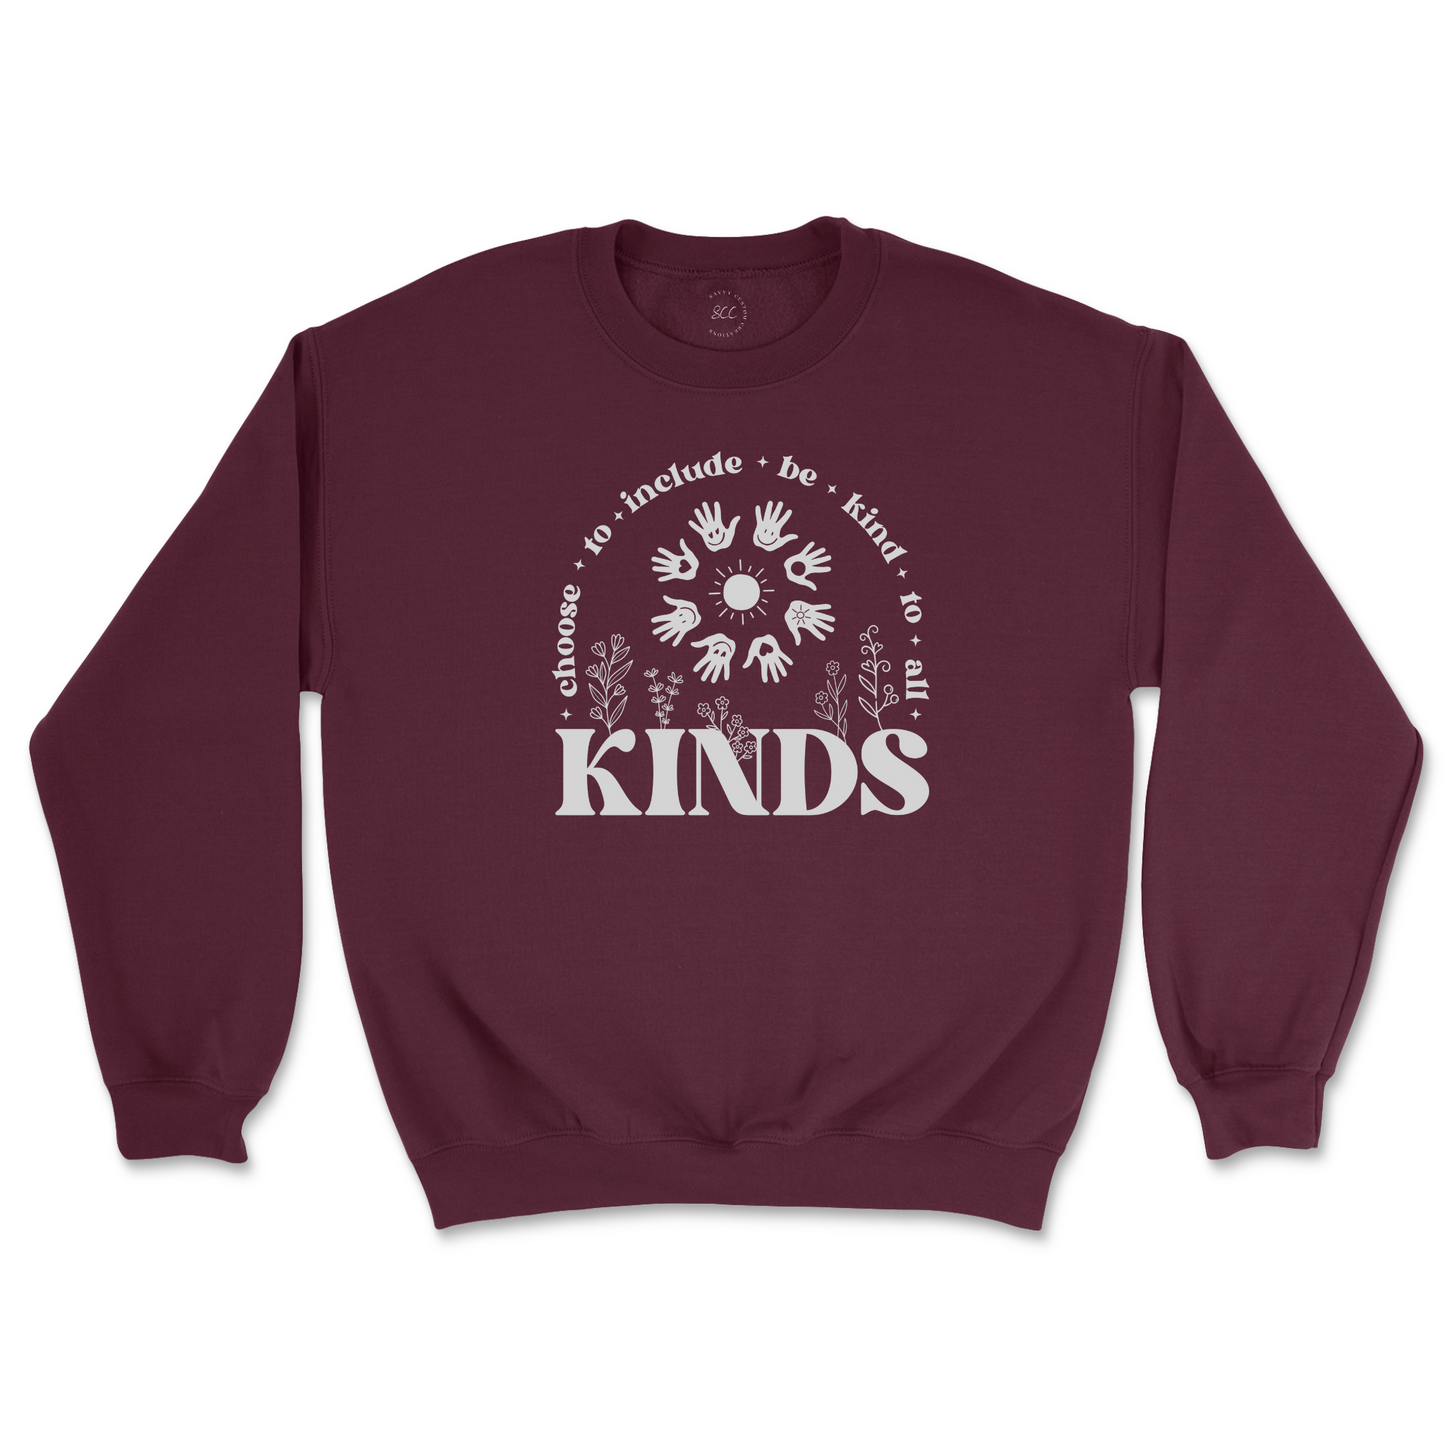 Choose to include, be kind to all KINDS - Unisex Sweatshirt